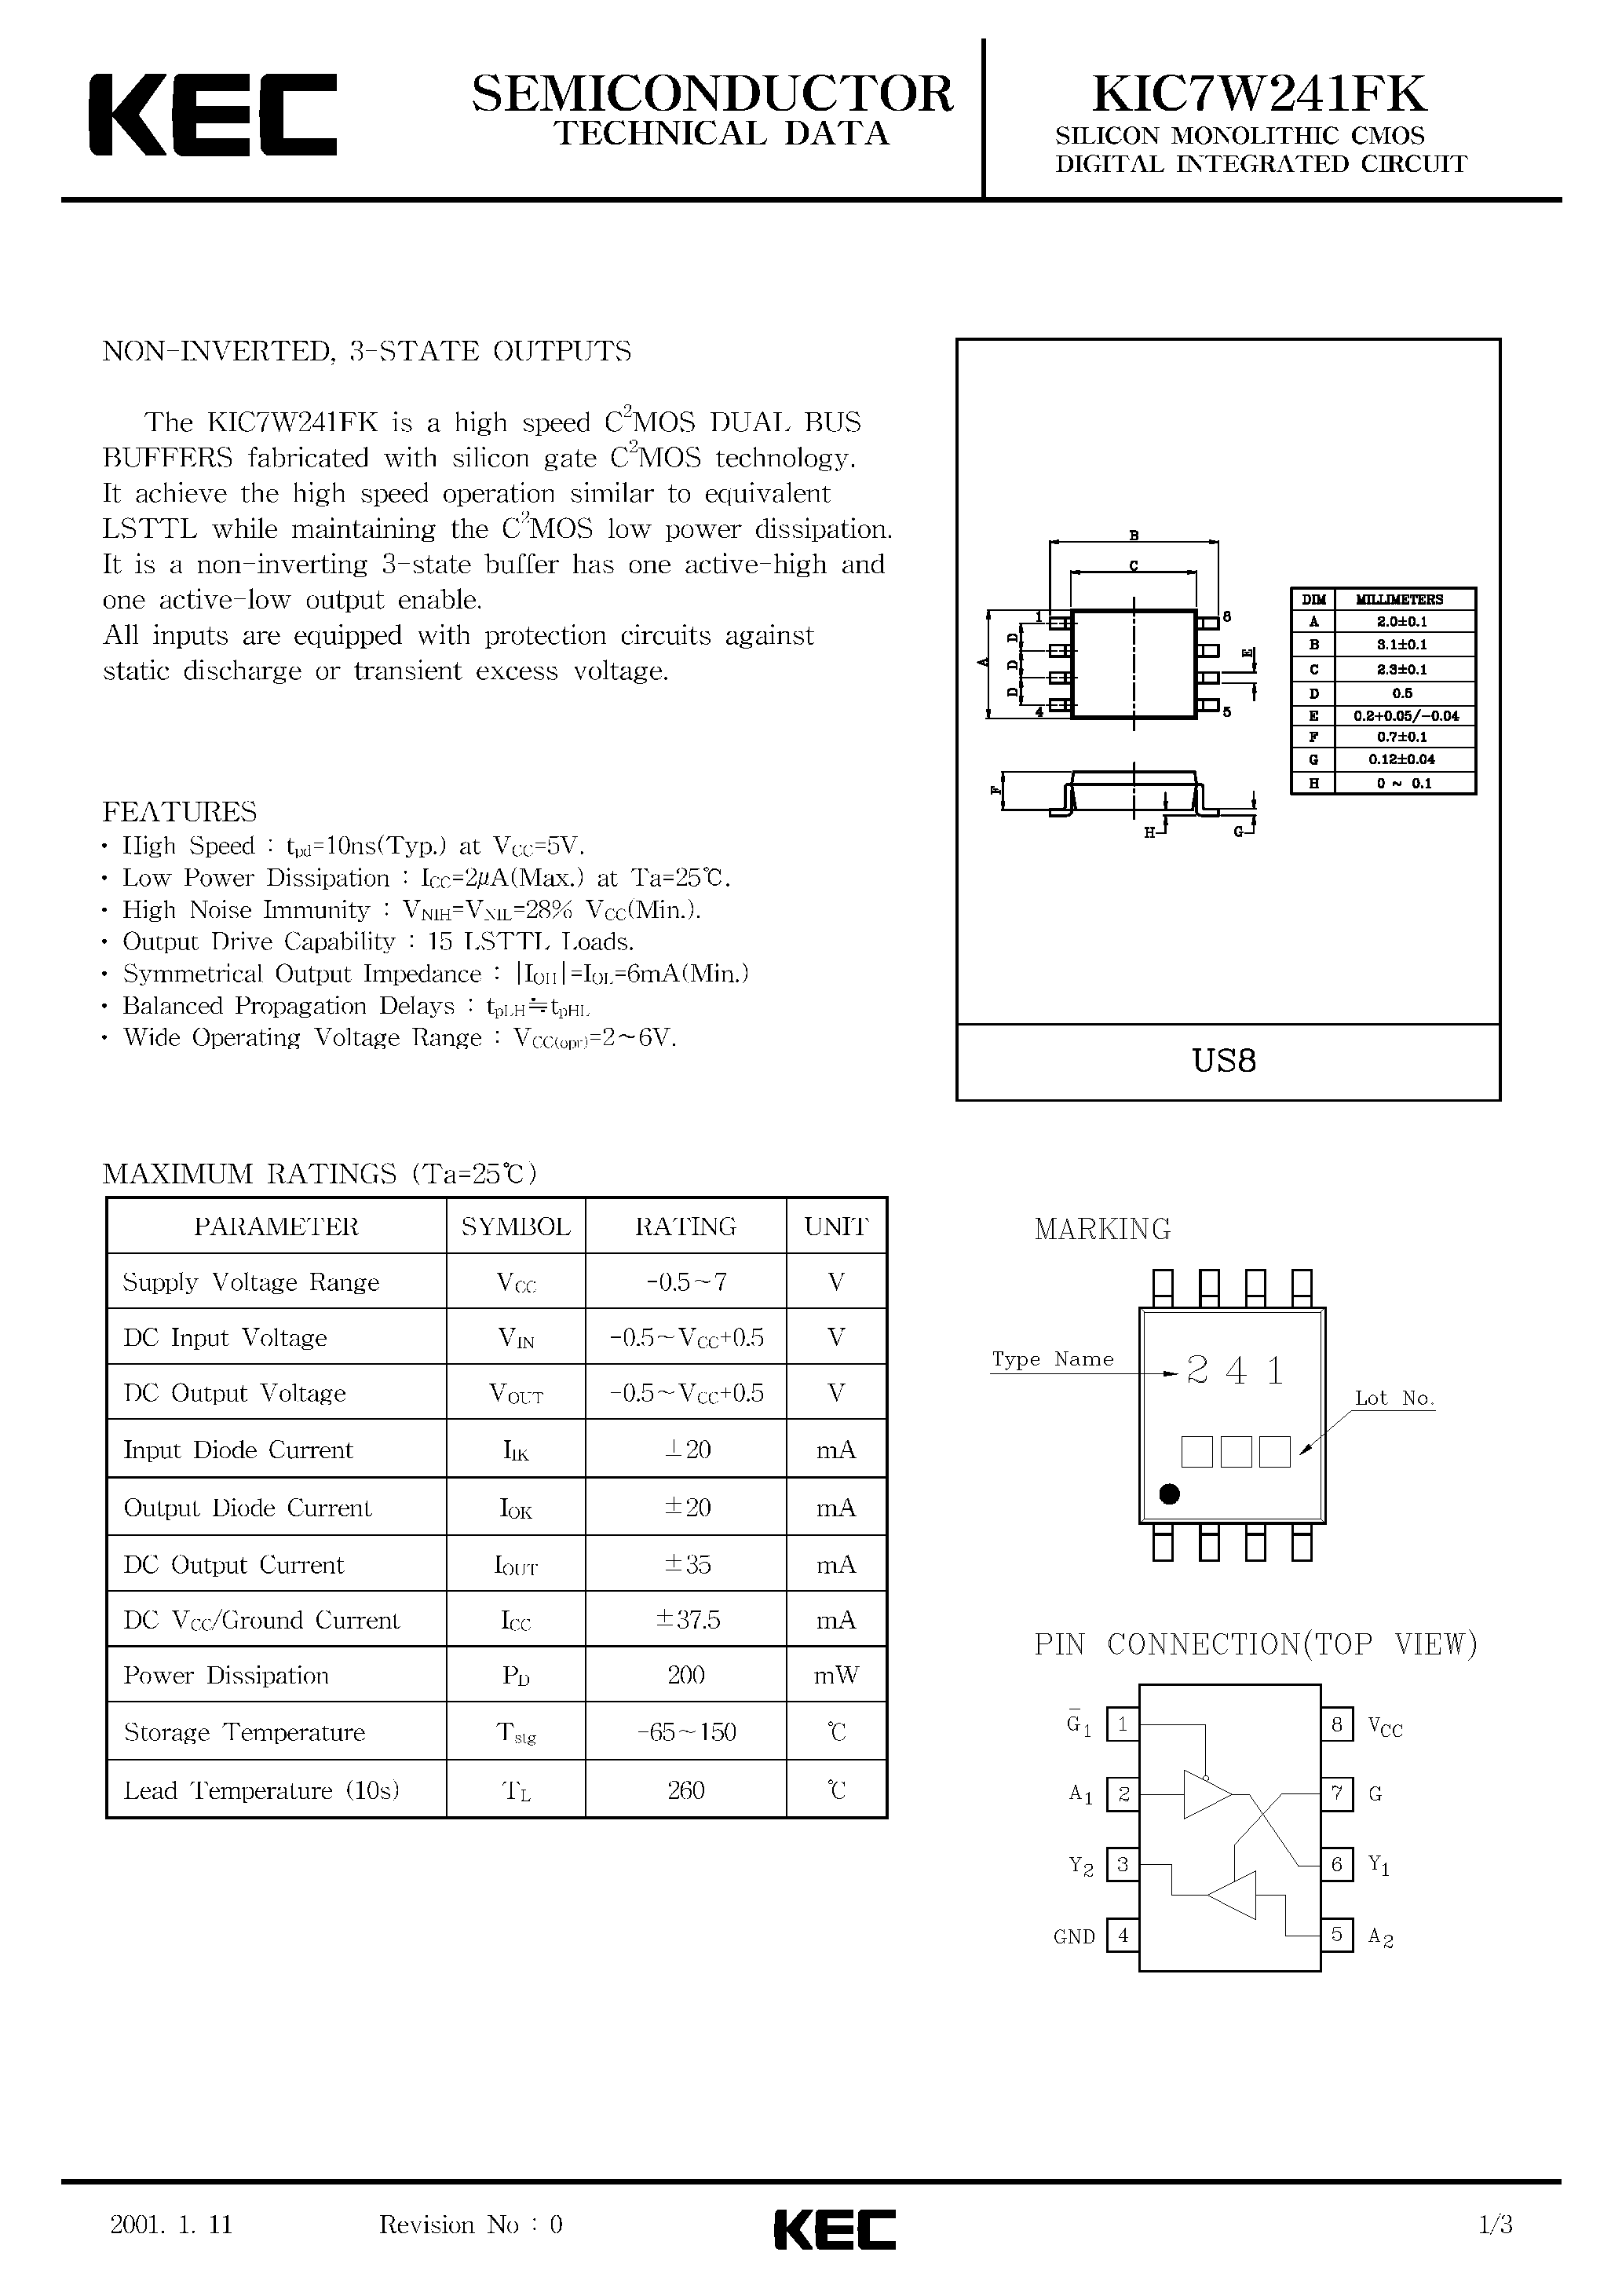 Datasheet KIC7W241FK - SILICON MONOLITHIC CMOS DIGITAL INTEGRATED CIRCUIT(NON-INVERTED/ 3-STATE OUTPUTS) page 1